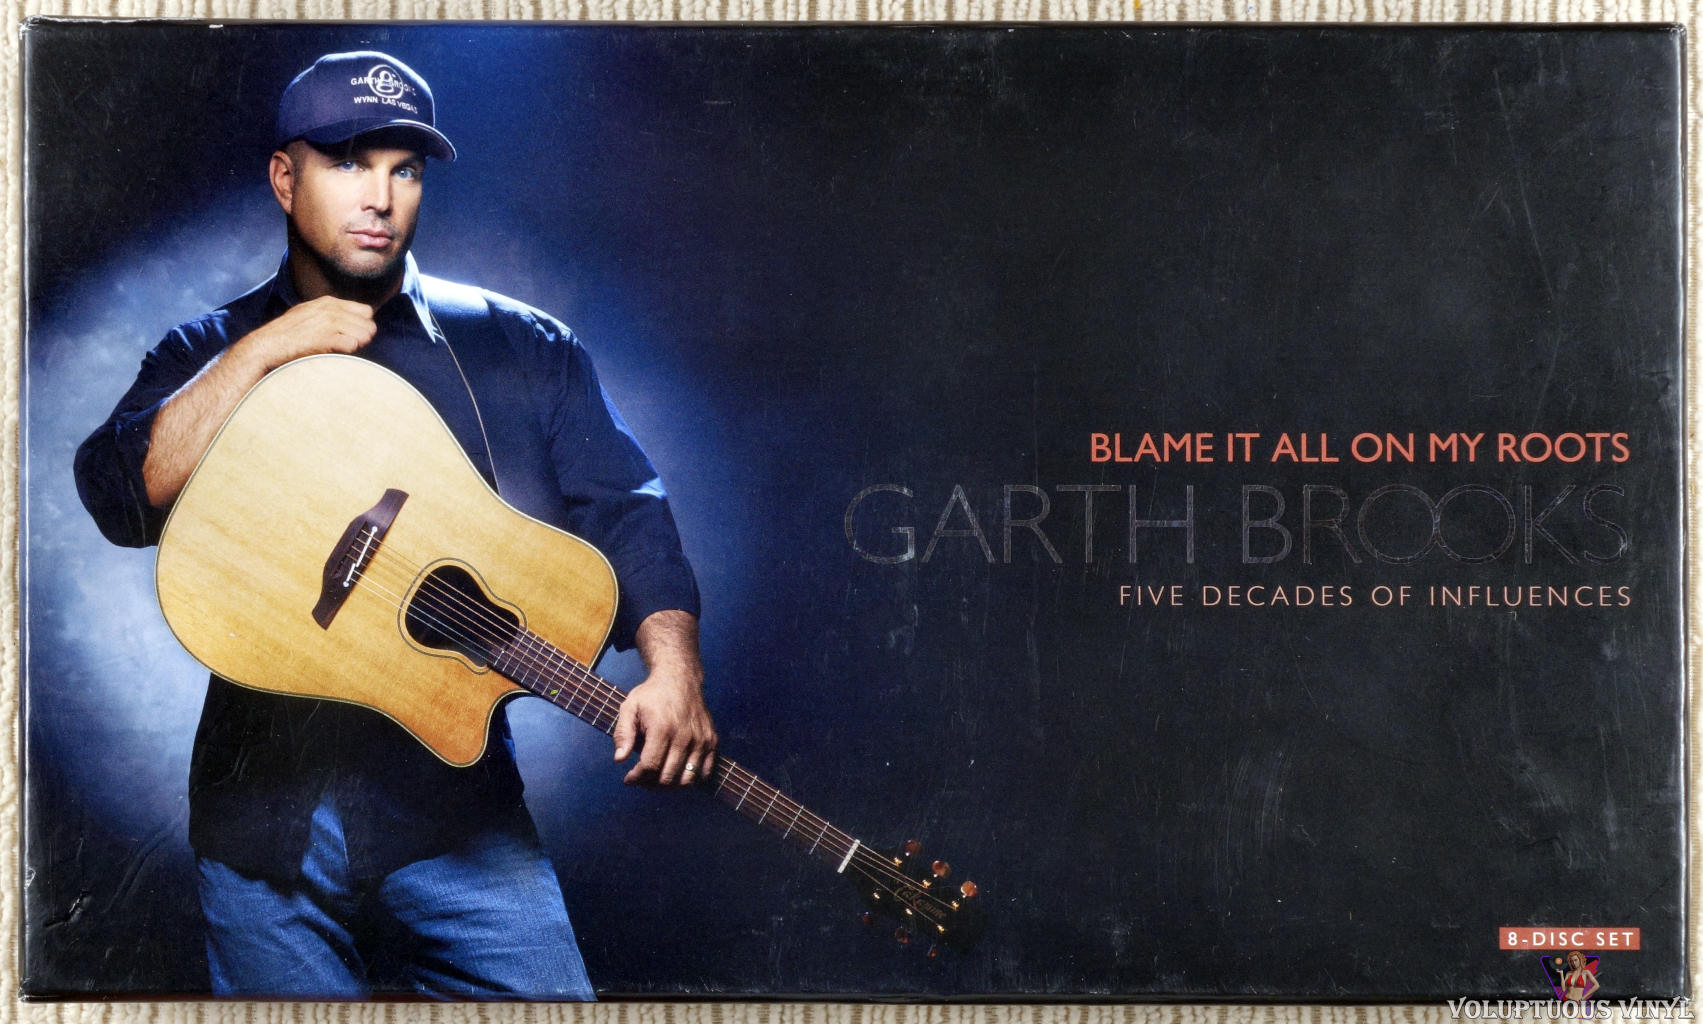 Garth Brooks Box Sets The Entertainer Blame it all on my Roots